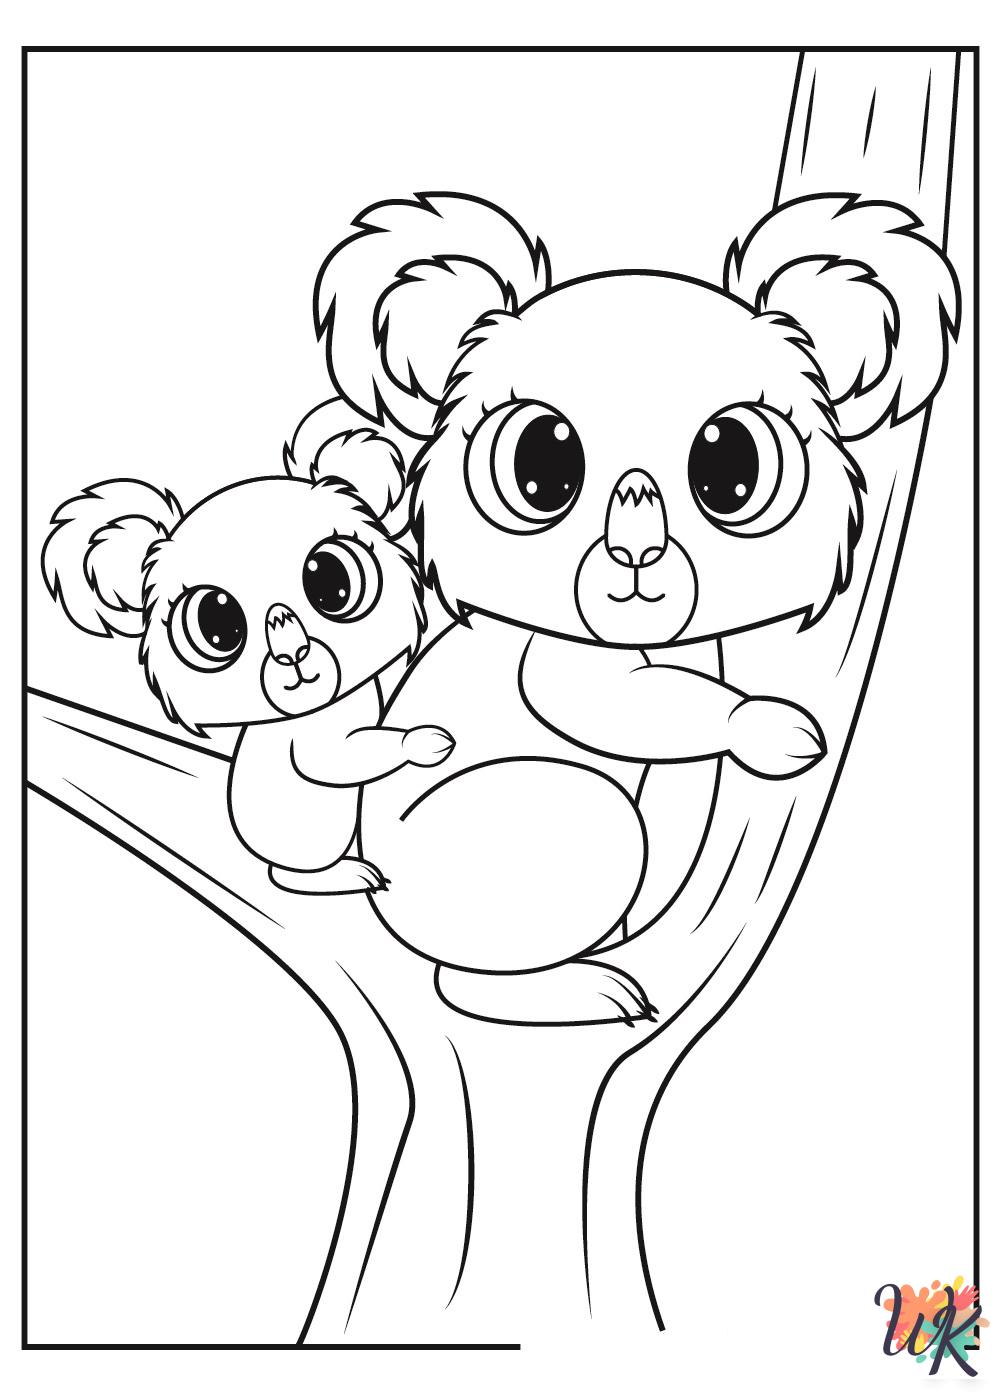 free Koala coloring pages for kids